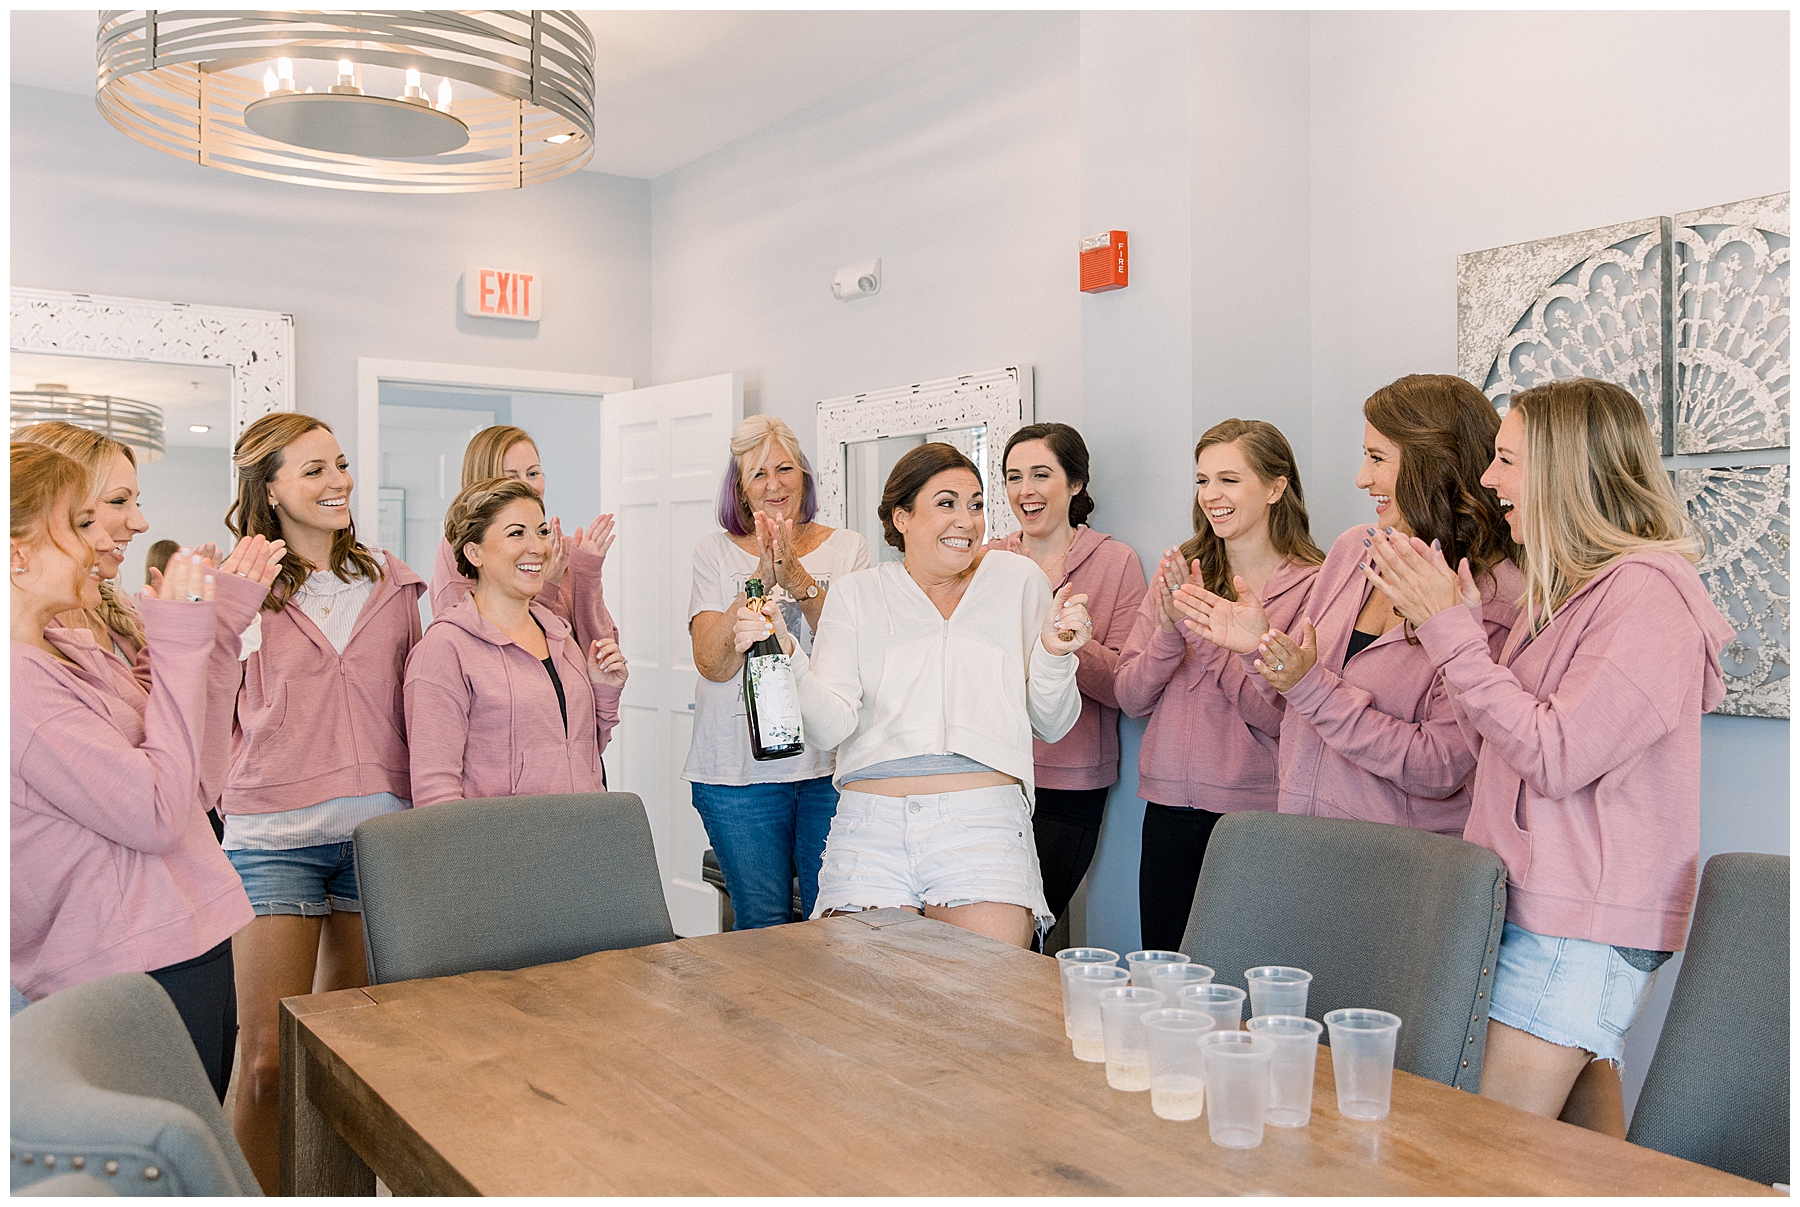 Bridesmaids and bride celebrate wedding day with champagne